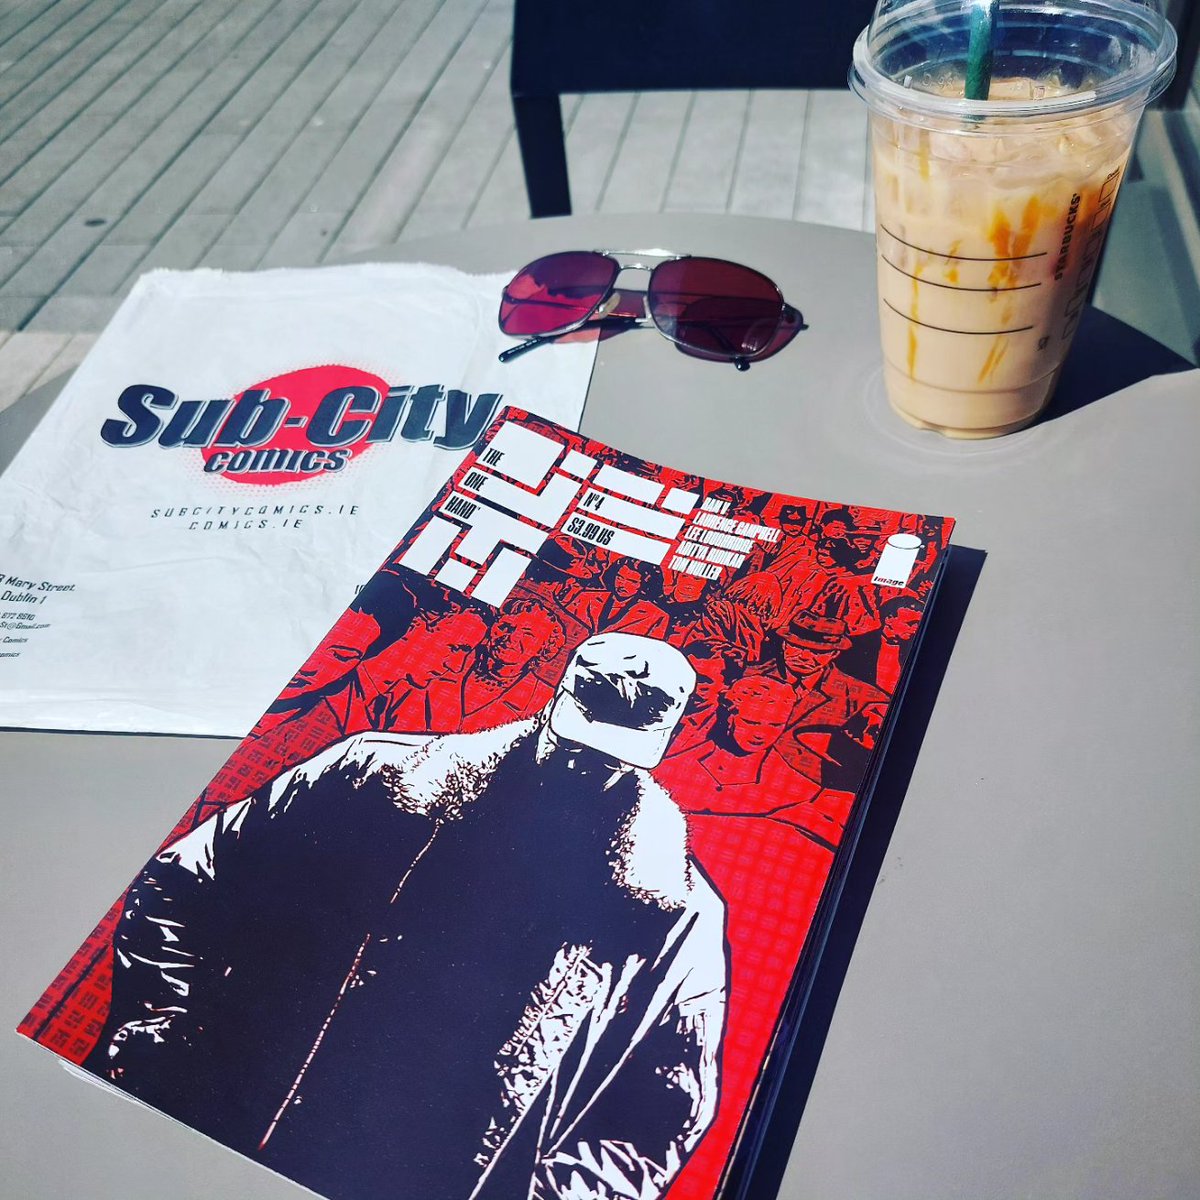 More comics & coffee. The One Hand #4 is such a great read. A slick thriller written by Ram V with Laurence Campbell's pages blowing my mind. I can't wait for more, just so I can read it all again. This series, interwoven with 'The Six Fingers' is some of the best comics out now.